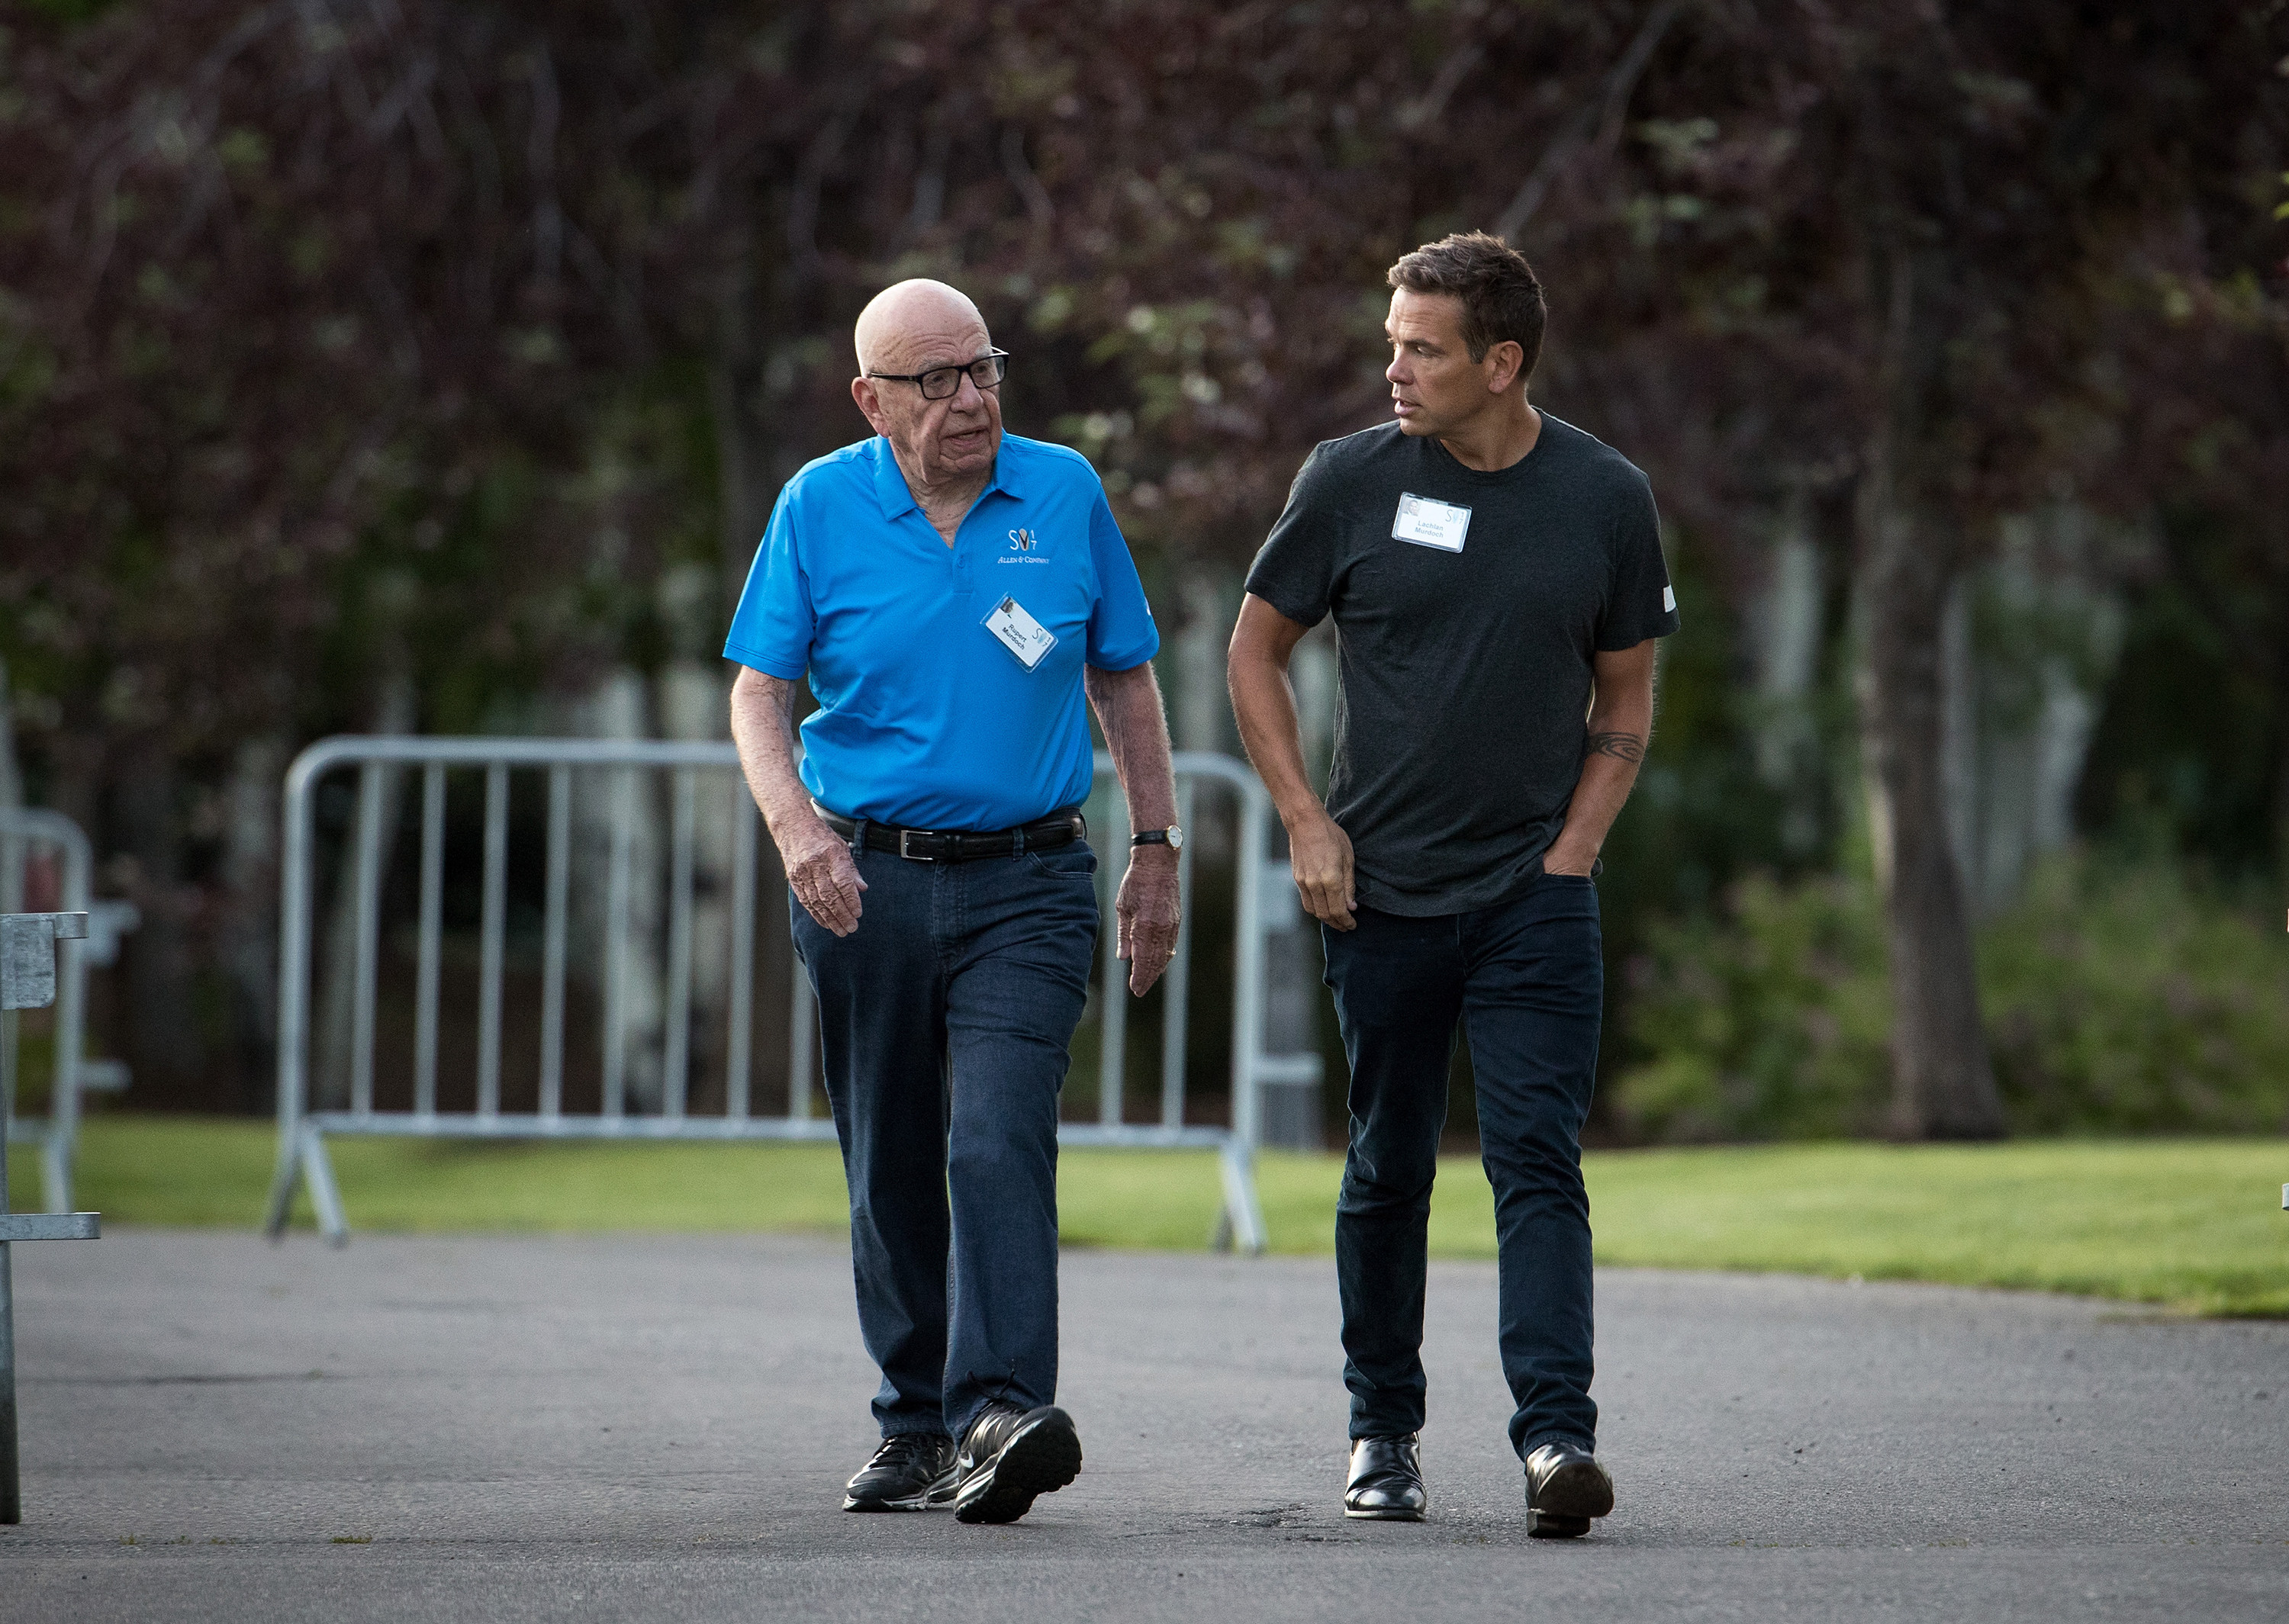 Rupert Murdoch, left, executive chairman of News Corp and chairman of Fox News, and his son Lachlan, co-chairman of 21st Century Fox, walk together in Sun Valley, Idaho, on July 13, 2017. Photo: Getty Images/TNS